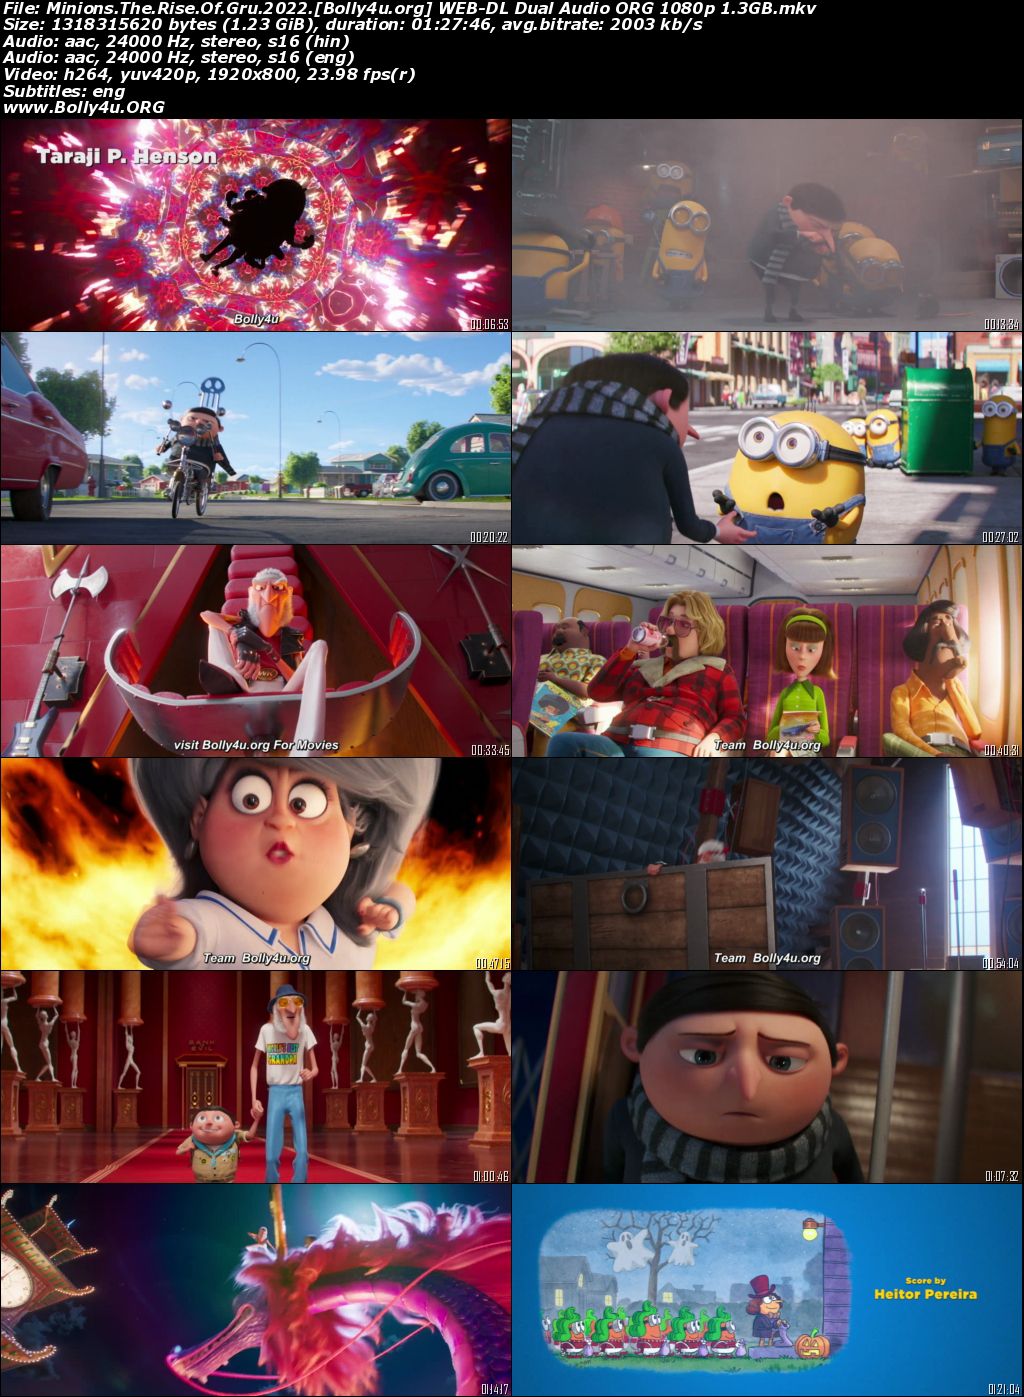 Minions The Rise of Gru 2022 WEB-DL Hindi Dual Audio ORG Full Movie Download 1080p 720p 480p